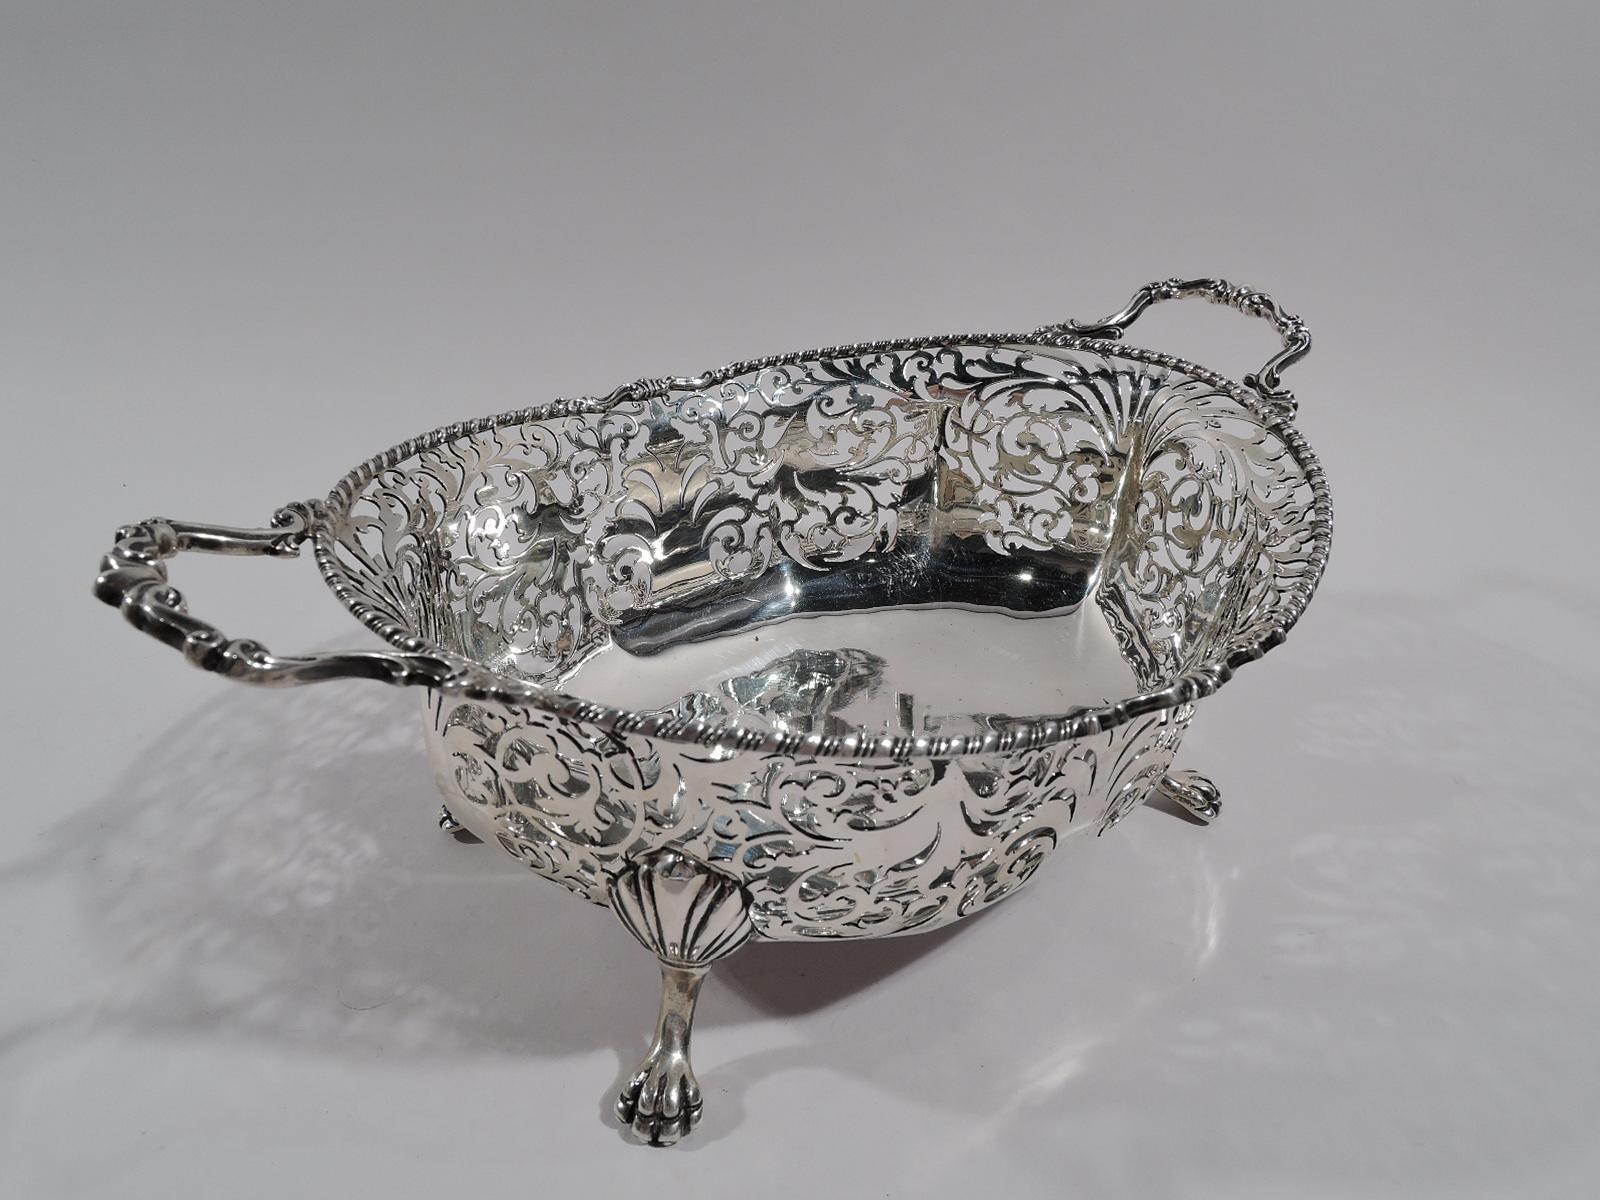 Edwardian Antique English Sterling Silver Basket Bowl by Mappin & Webb